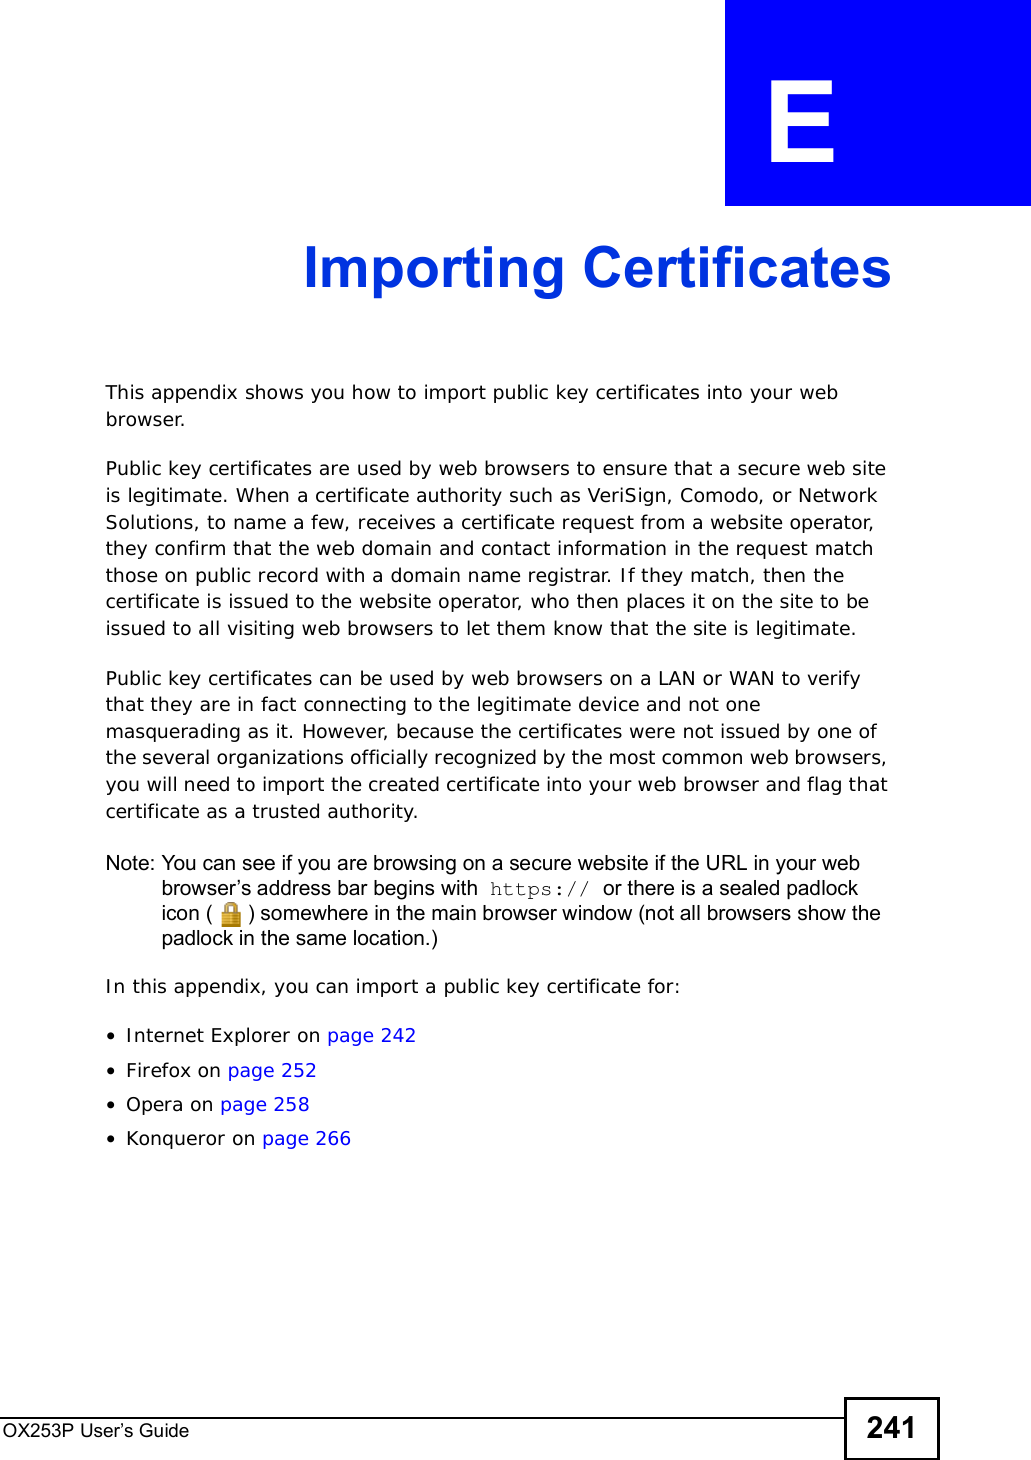 OX253P User’s Guide 241APPENDIX  E Importing CertificatesThis appendix shows you how to import public key certificates into your web browser. Public key certificates are used by web browsers to ensure that a secure web site is legitimate. When a certificate authority such as VeriSign, Comodo, or Network Solutions, to name a few, receives a certificate request from a website operator, they confirm that the web domain and contact information in the request match those on public record with a domain name registrar. If they match, then the certificate is issued to the website operator, who then places it on the site to be issued to all visiting web browsers to let them know that the site is legitimate.Public key certificates can be used by web browsers on a LAN or WAN to verify that they are in fact connecting to the legitimate device and not one masquerading as it. However, because the certificates were not issued by one of the several organizations officially recognized by the most common web browsers, you will need to import the created certificate into your web browser and flag that certificate as a trusted authority.Note: You can see if you are browsing on a secure website if the URL in your web browser’s address bar begins with  https:// or there is a sealed padlock icon () somewhere in the main browser window (not all browsers show the padlock in the same location.)In this appendix, you can import a public key certificate for:•Internet Explorer on page 242•Firefox on page 252•Opera on page 258•Konqueror on page 266